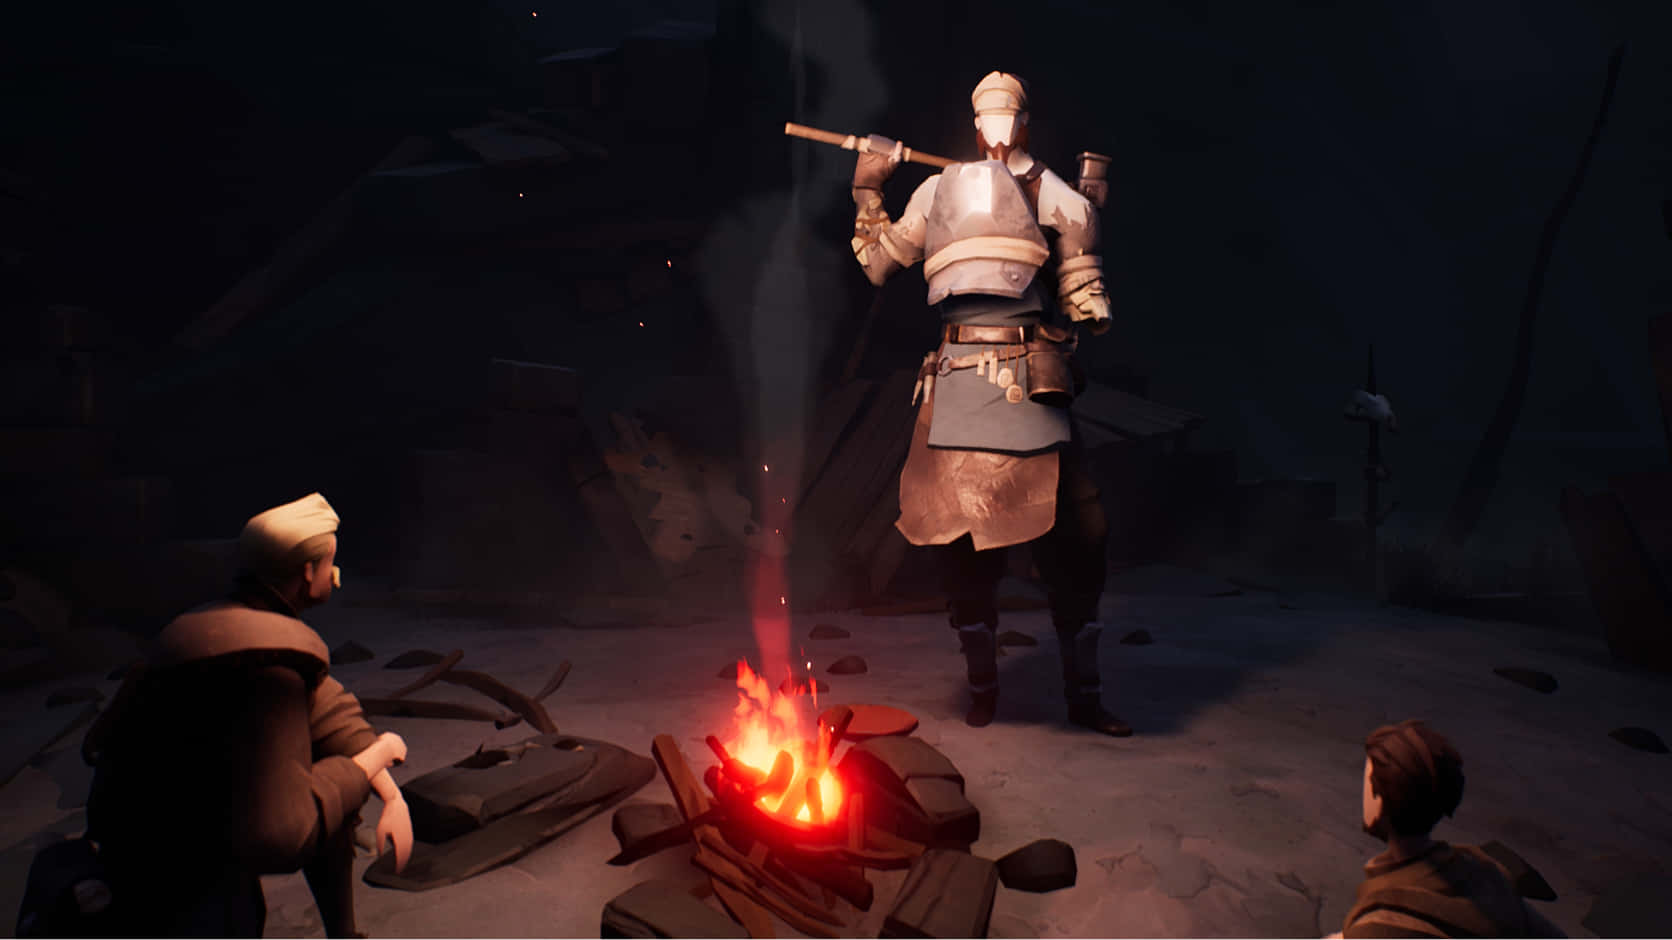 Explore a world of mystery with Ashen Wallpaper